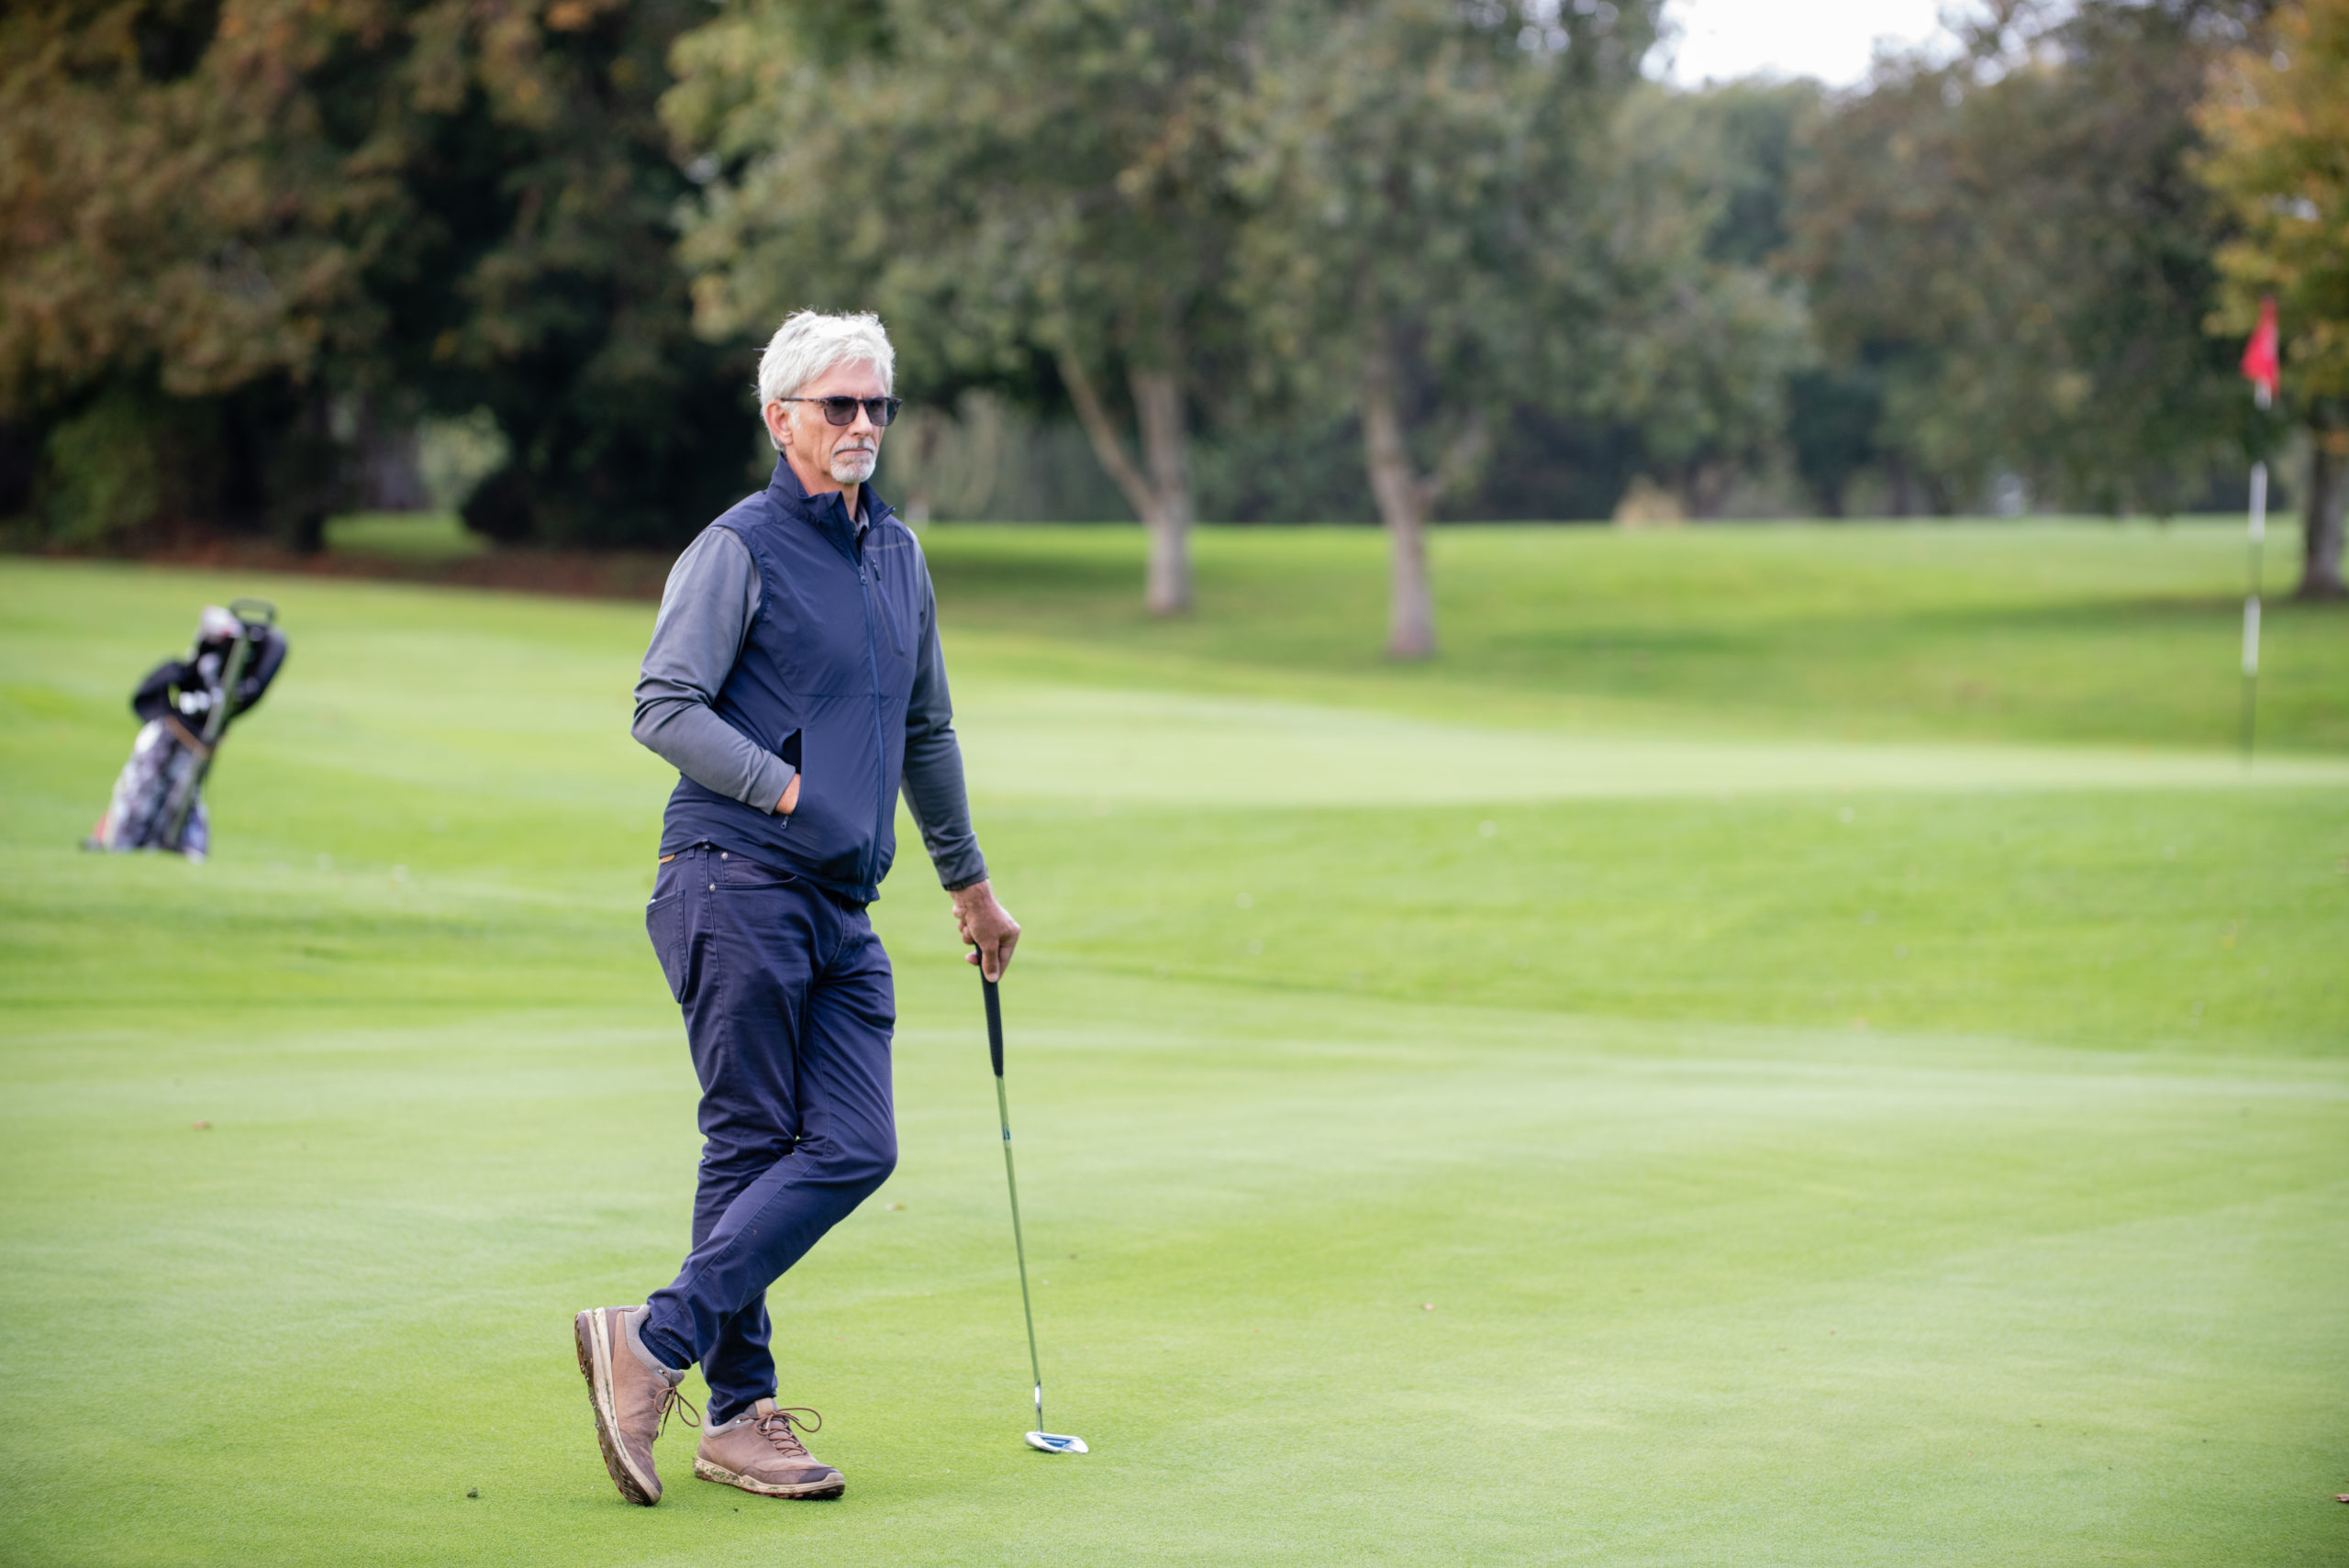 Damon Hill, patron of the DSA, rests between shots on a golf course